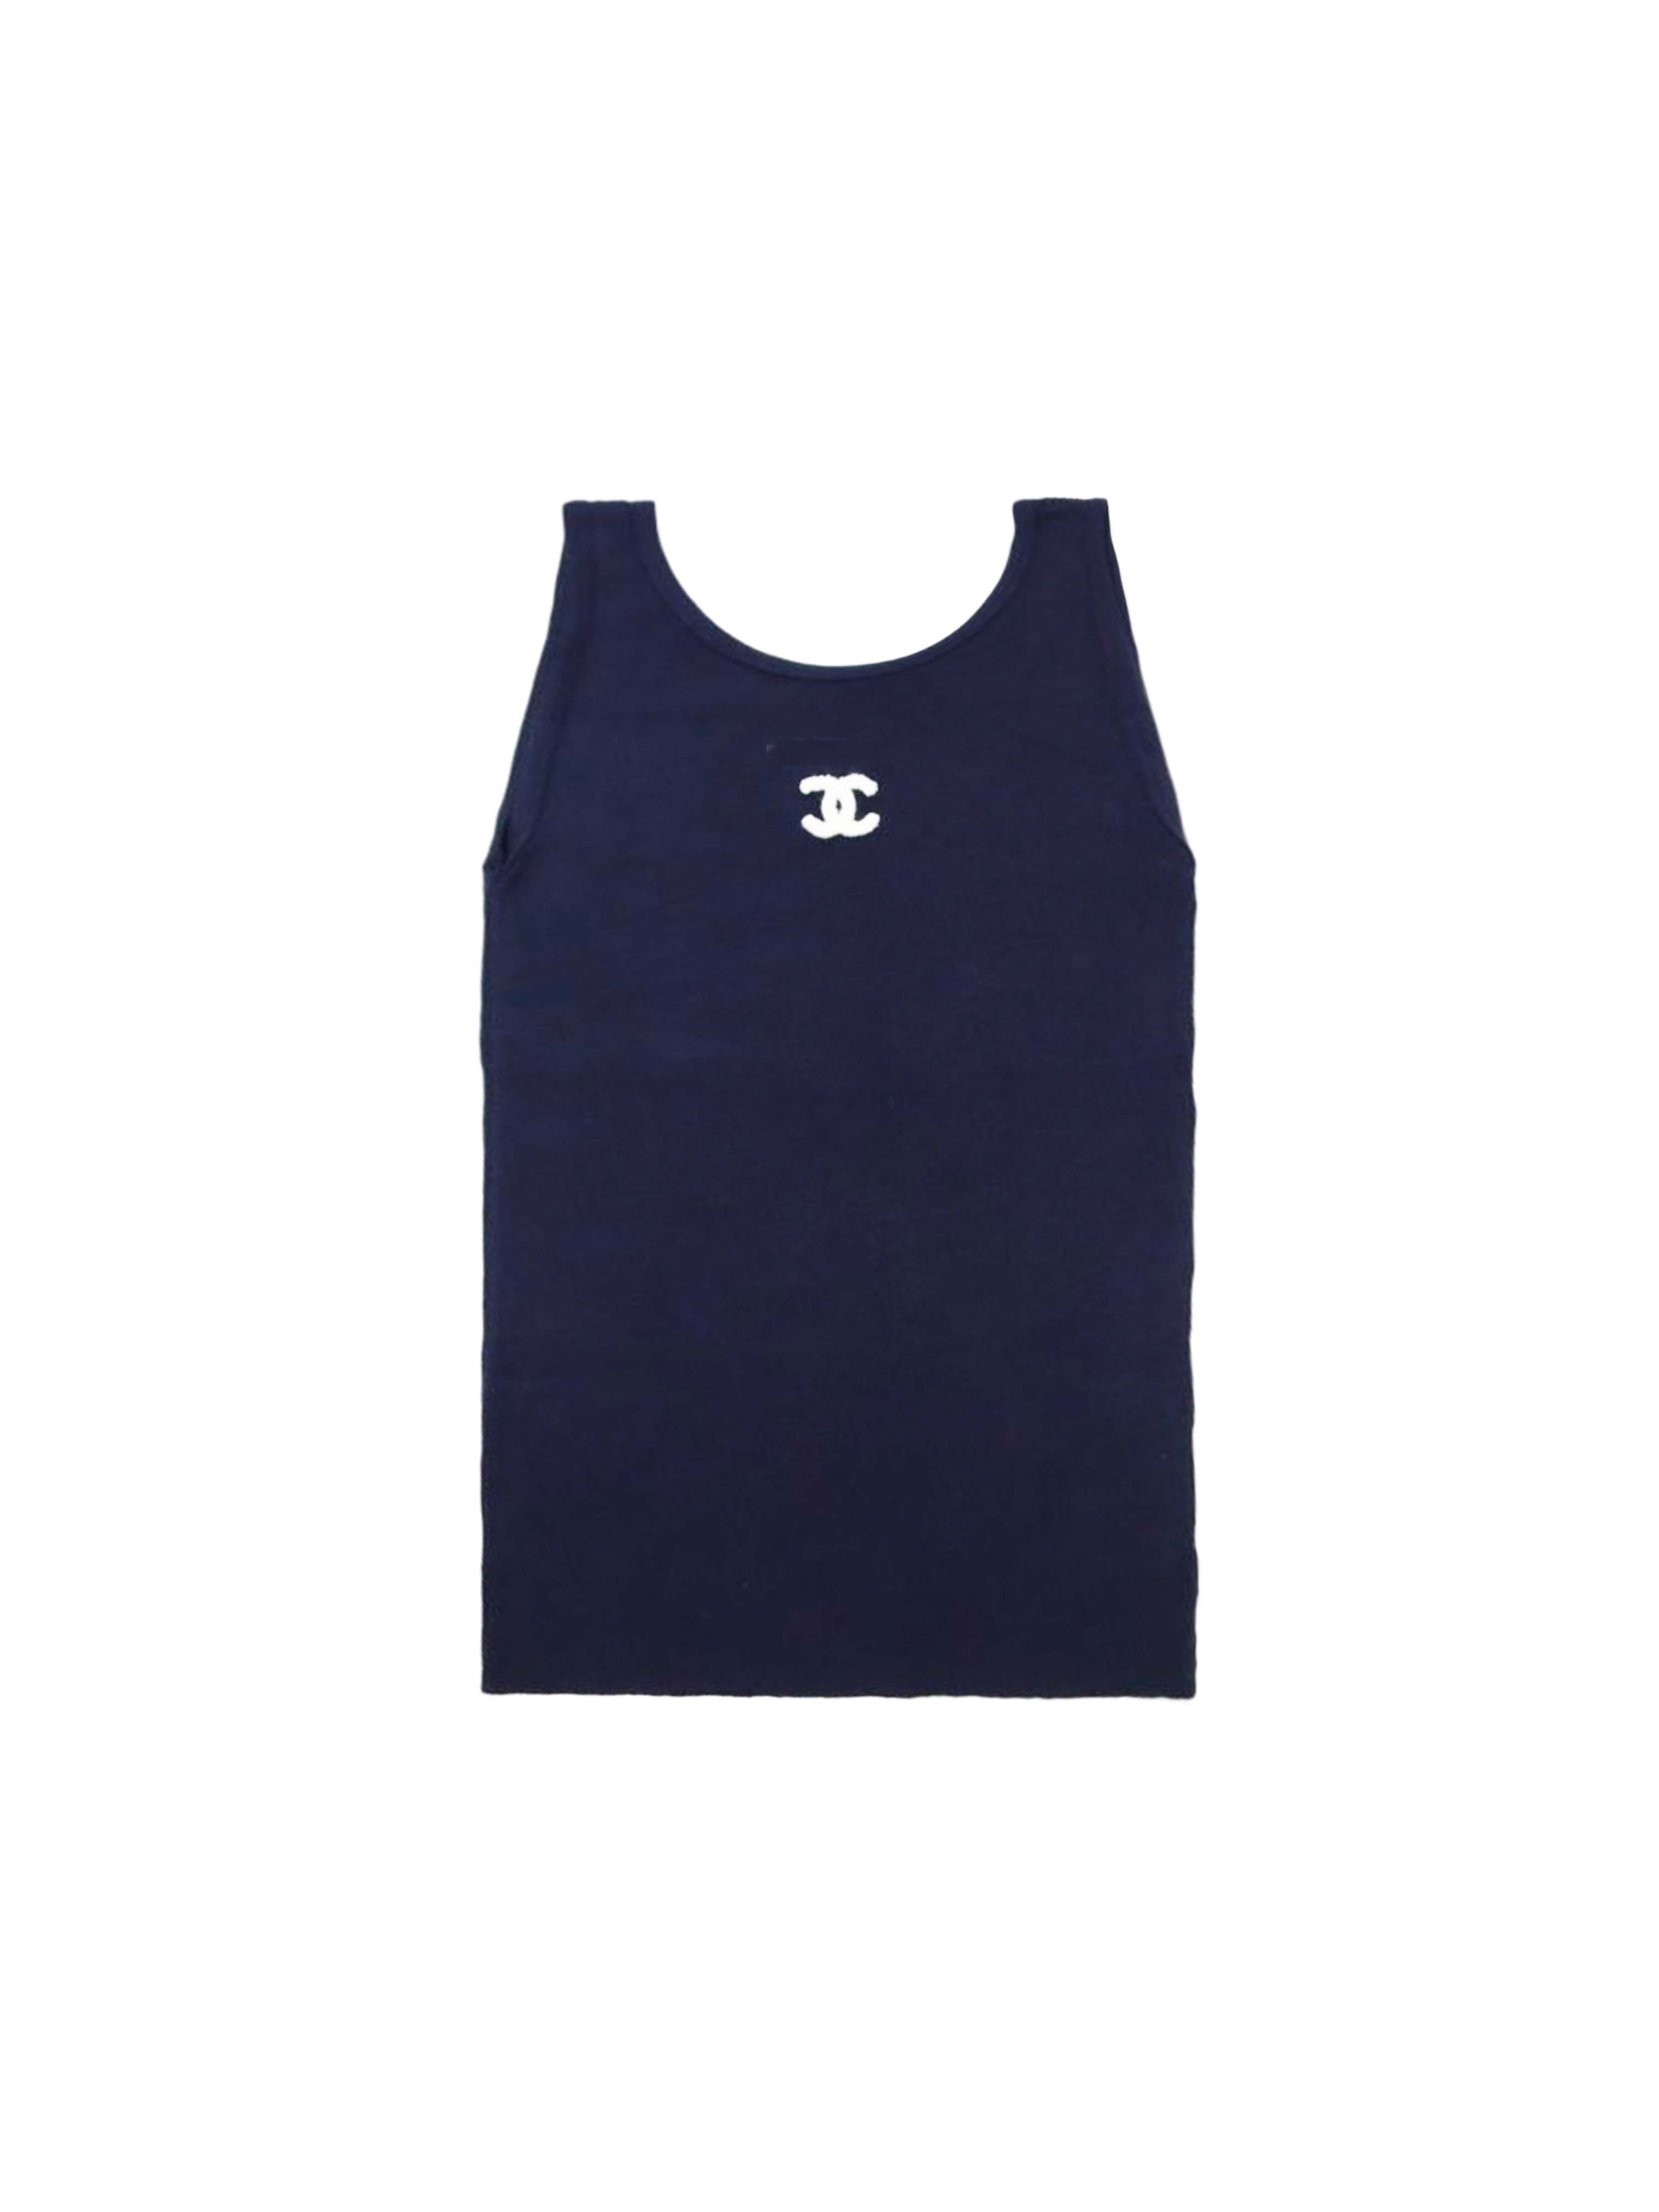 CHANEL Tank top #34 P37832K02551｜Product Code：2104101833647｜BRAND OFF  Online Store